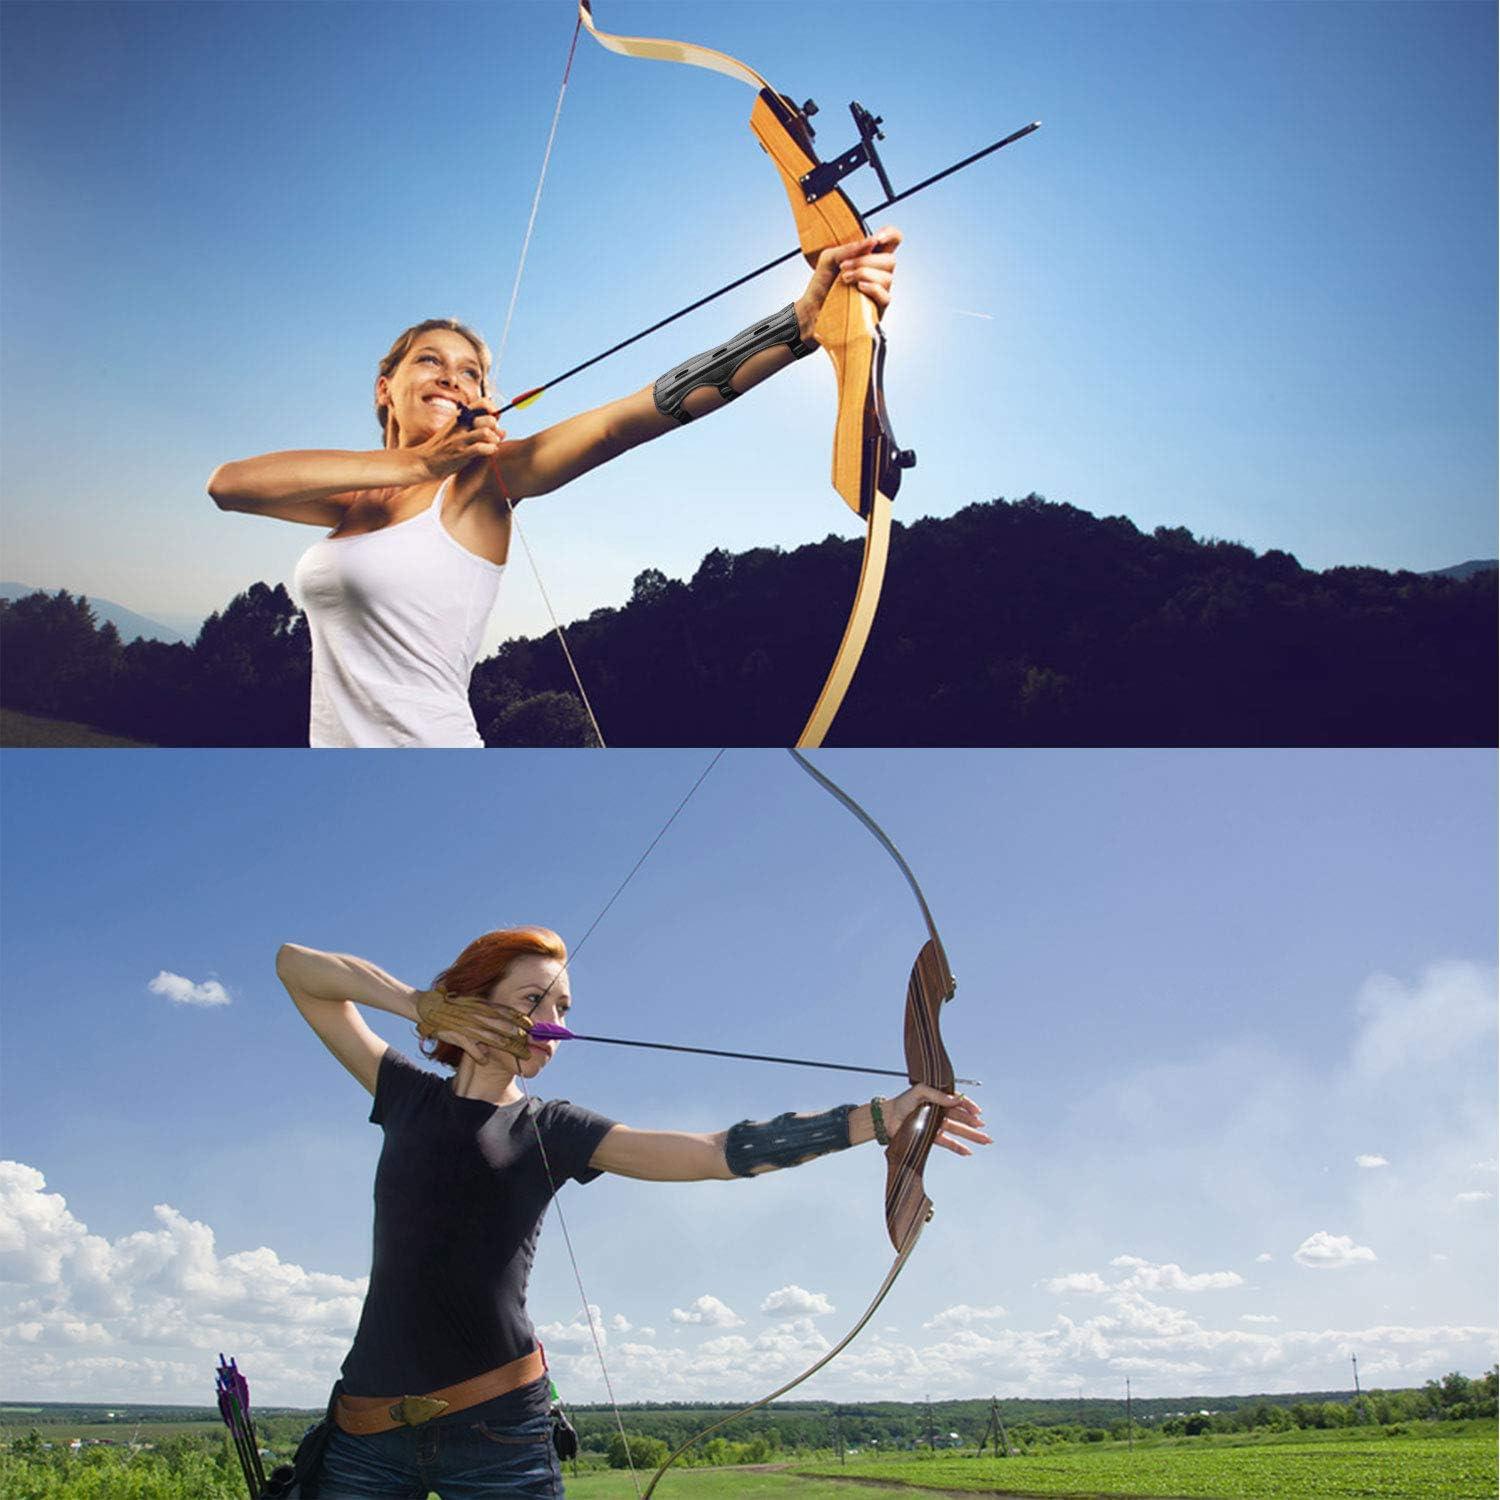 Were bracers only for archery? 